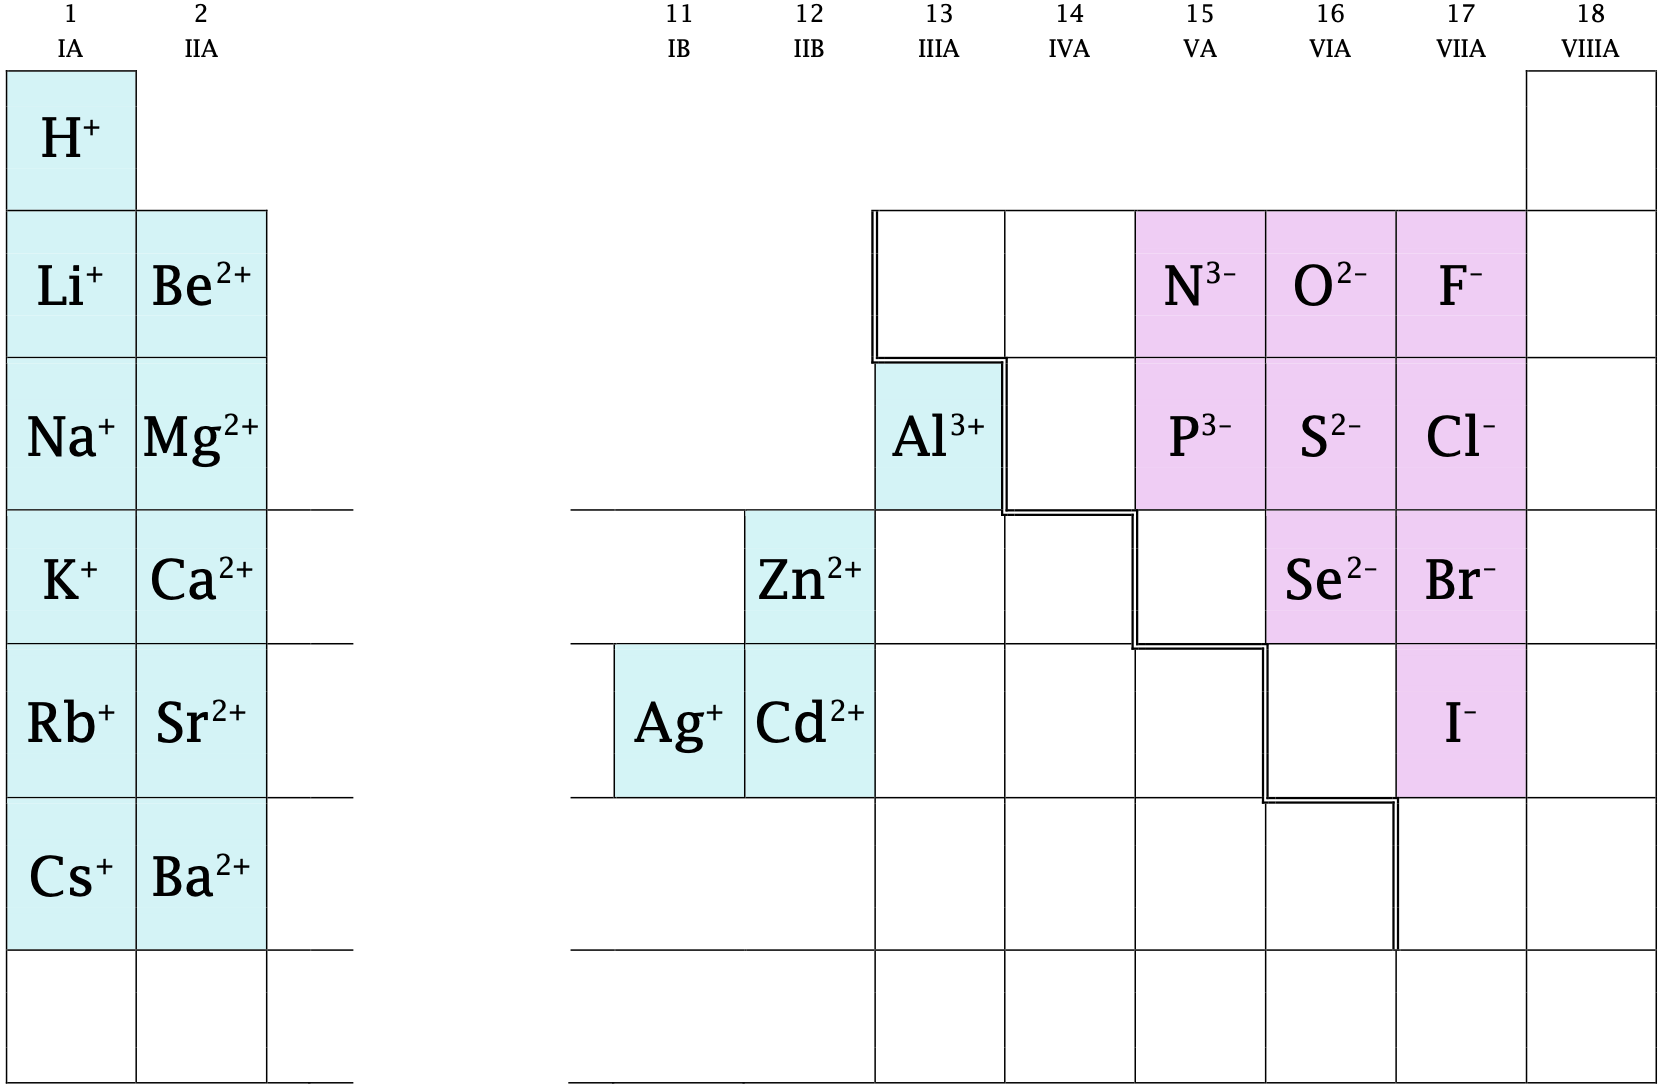 Periodic Table showing charges of ions based on position in the Periodic Table